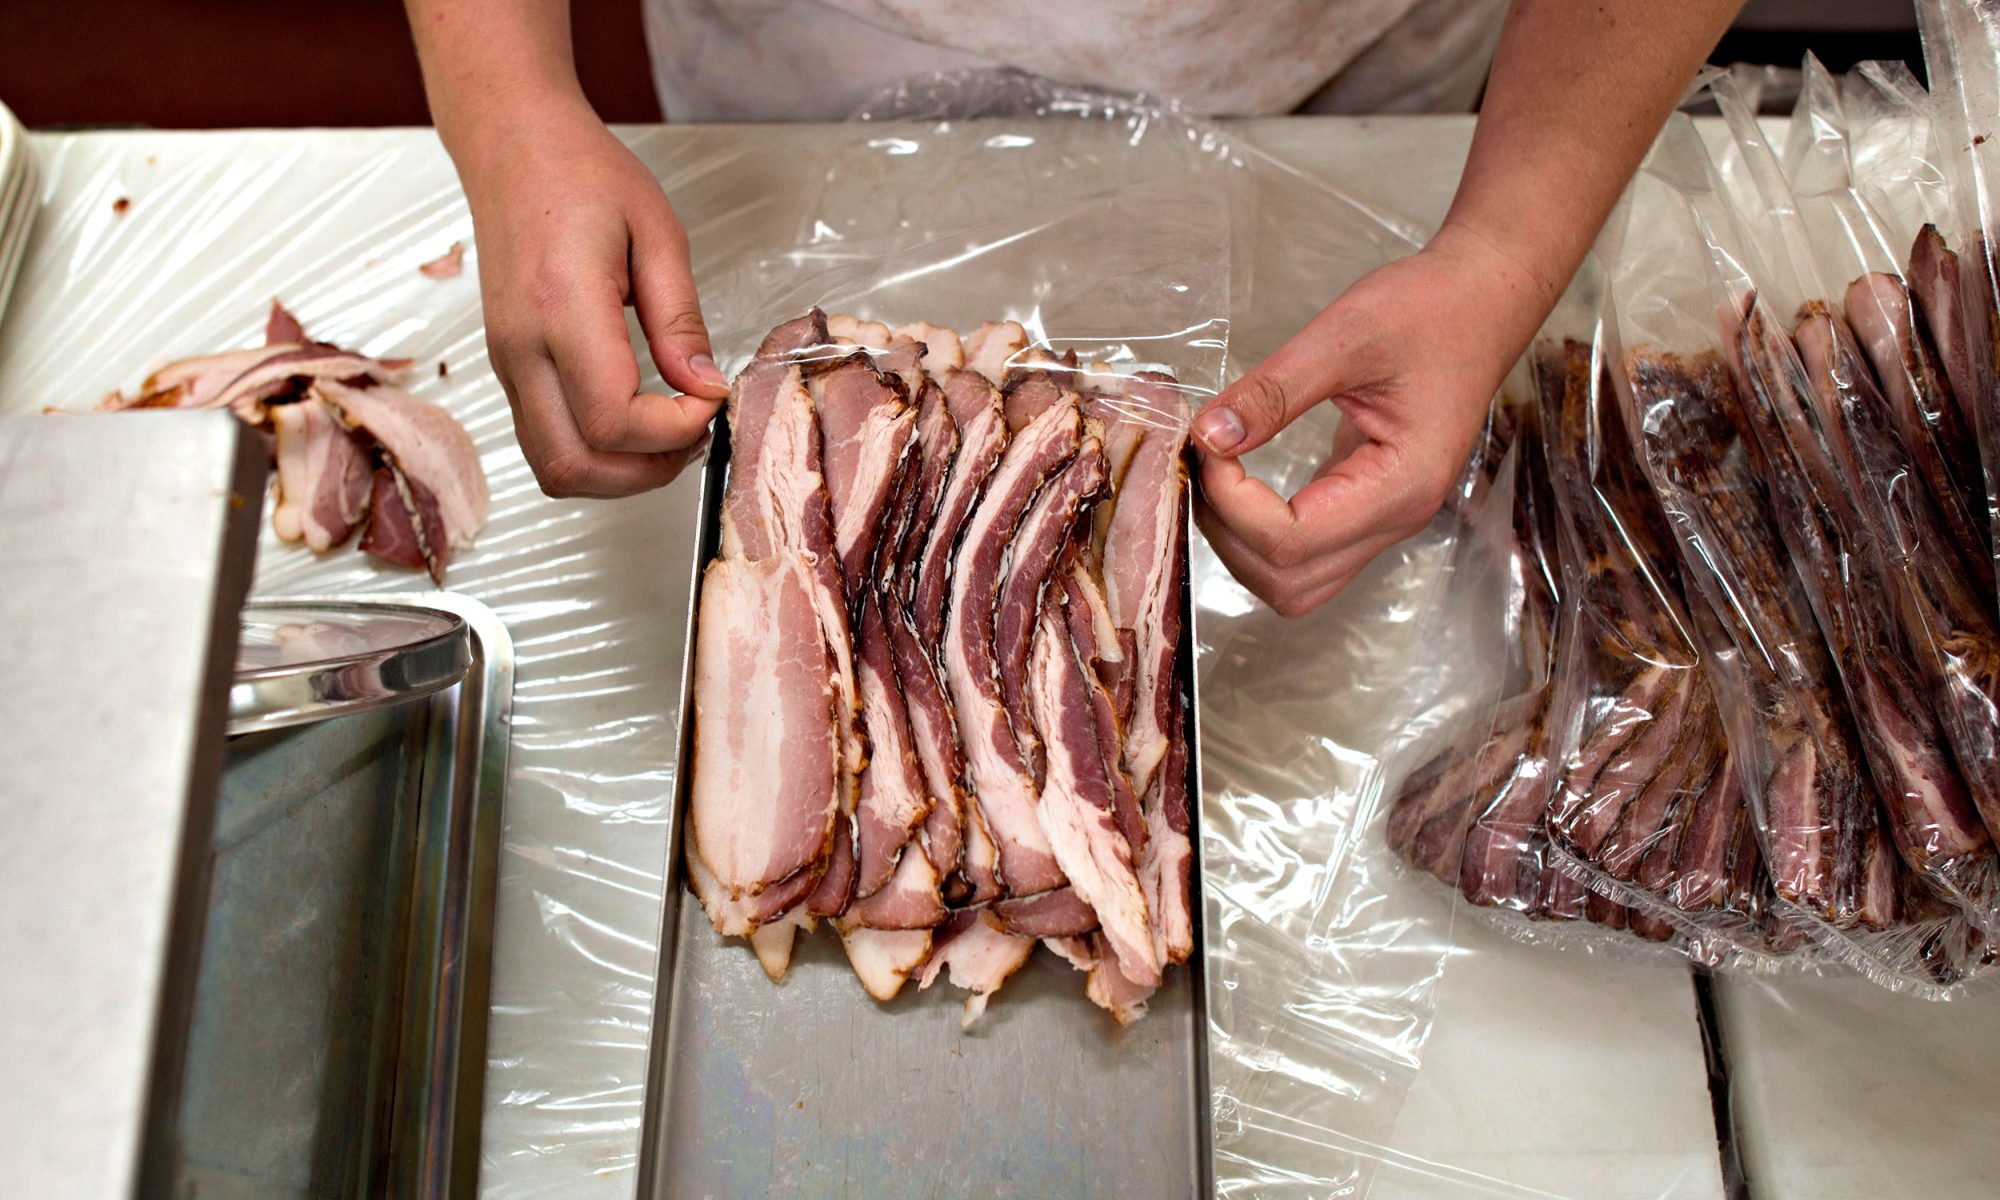 EC: How Much Weed Can You Get for a Pound of Stolen Bacon?